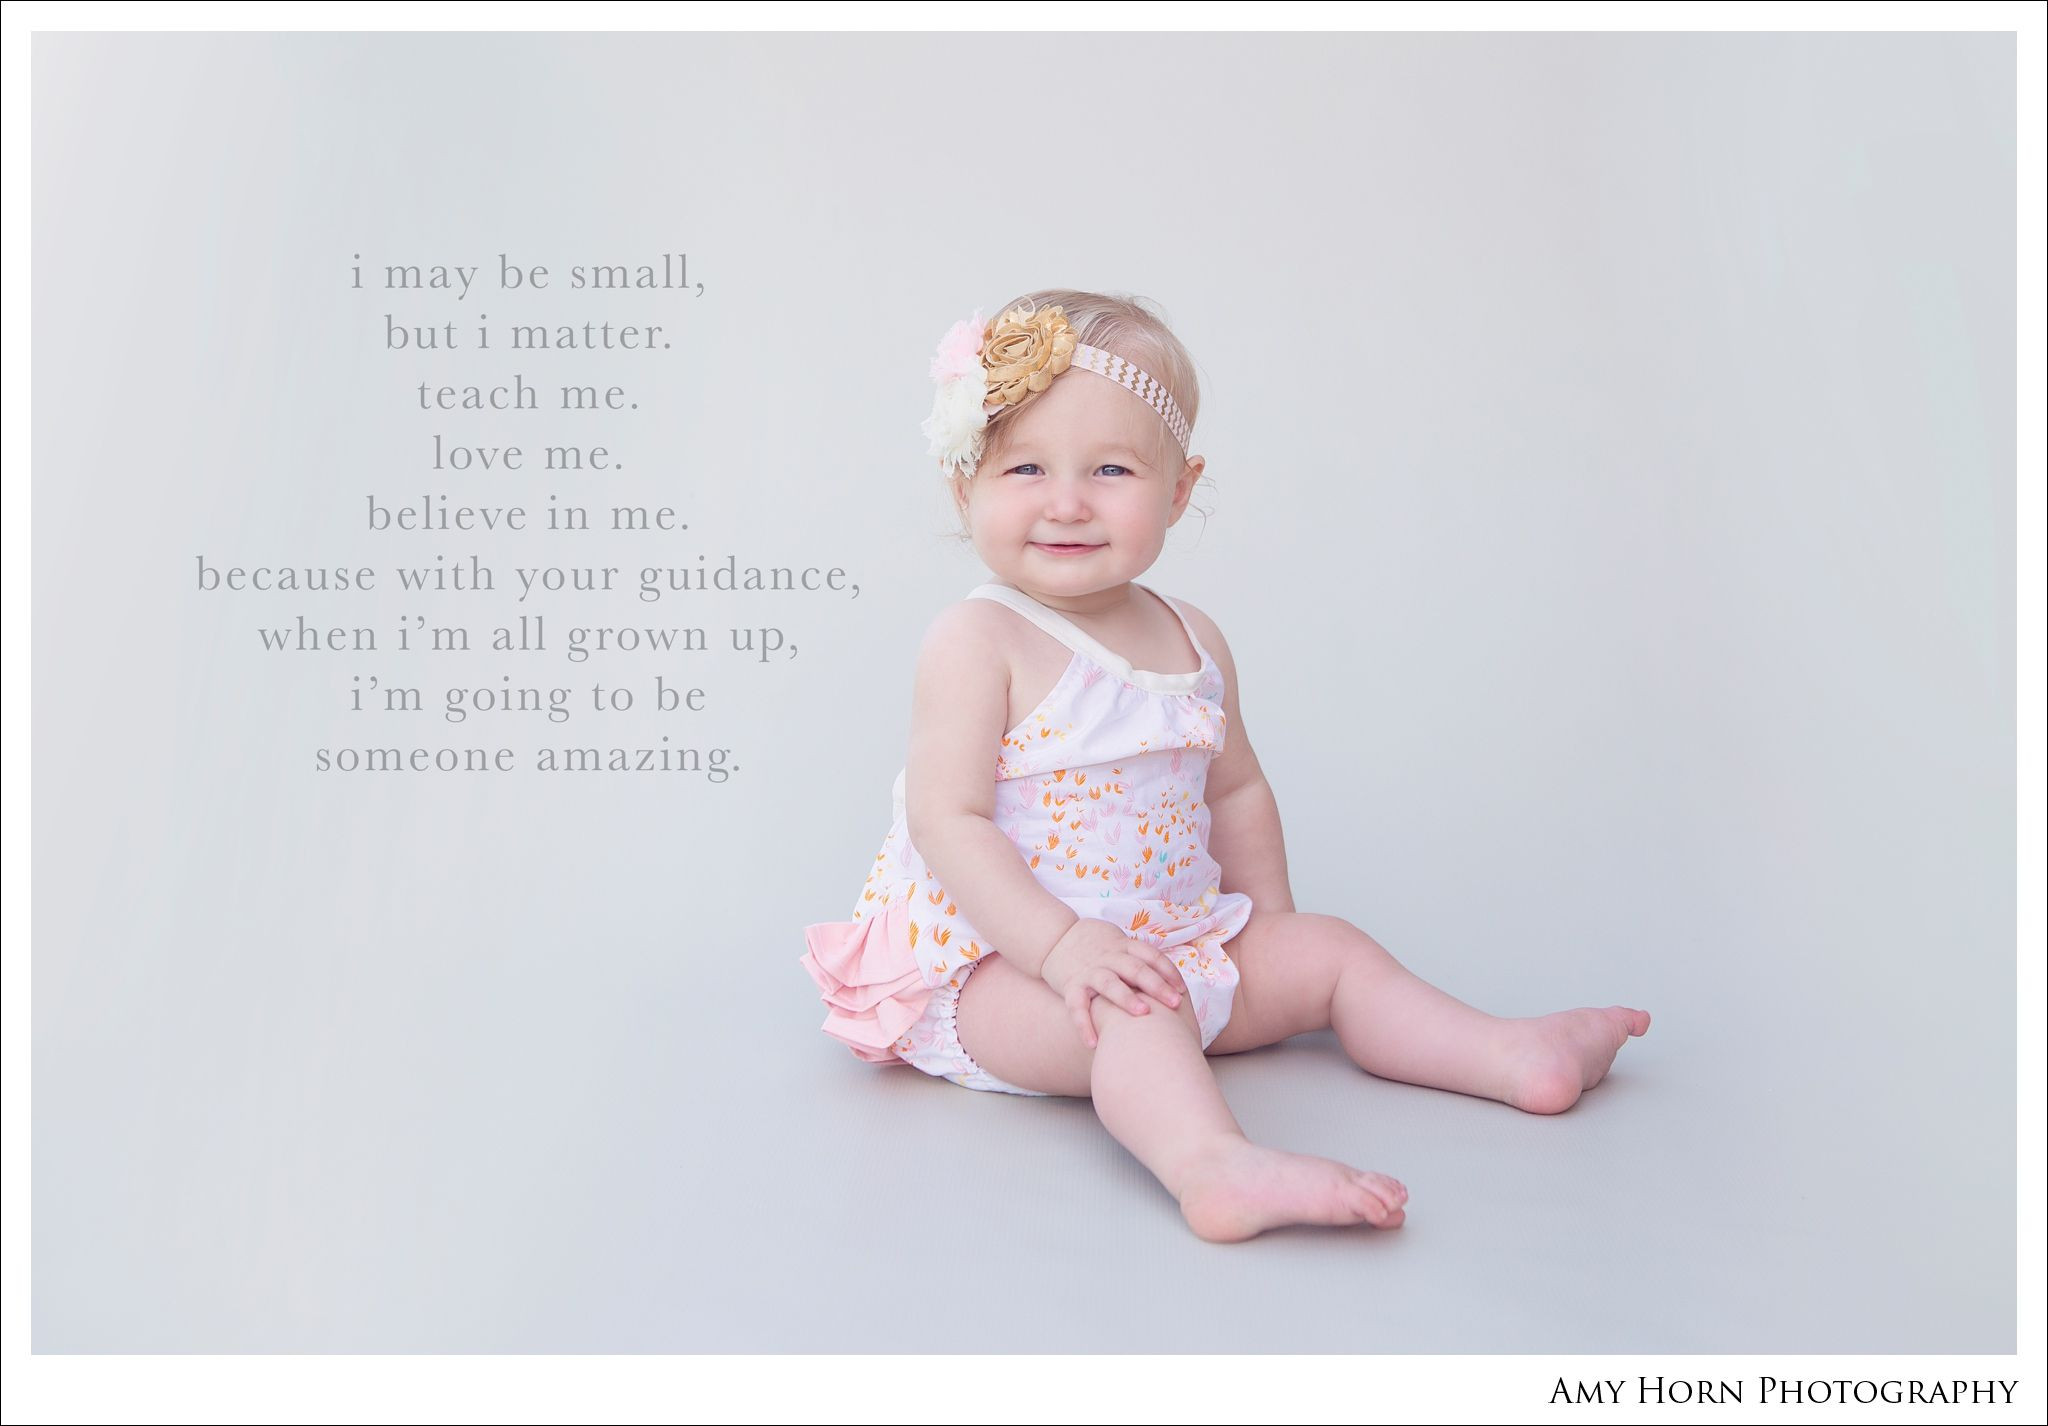 8 Month Old Baby Quotes
 8 month old baby photography in romper baby quote